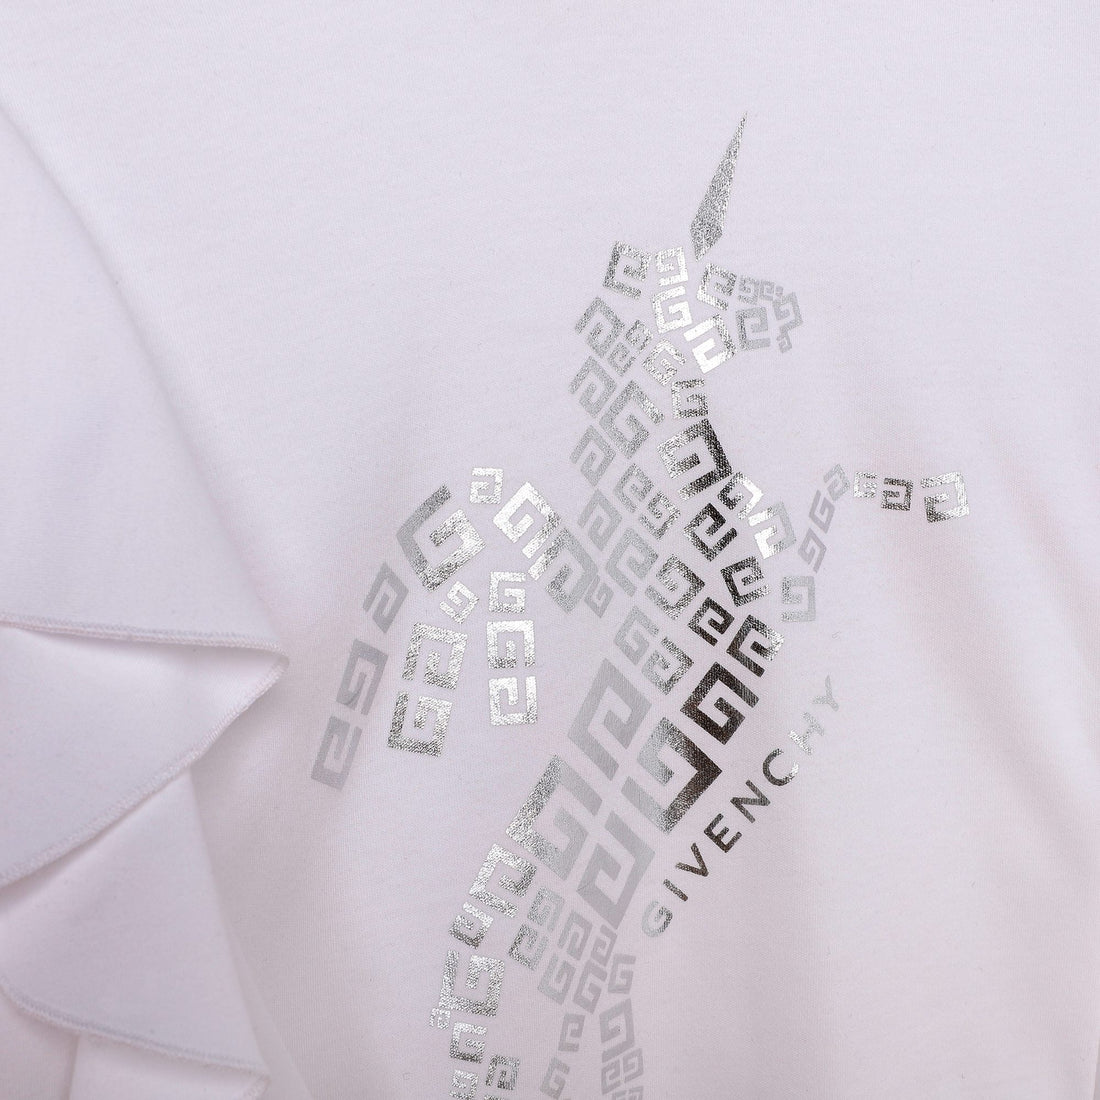 Givenchy Long Sleeve T-Shirt Style: H15361